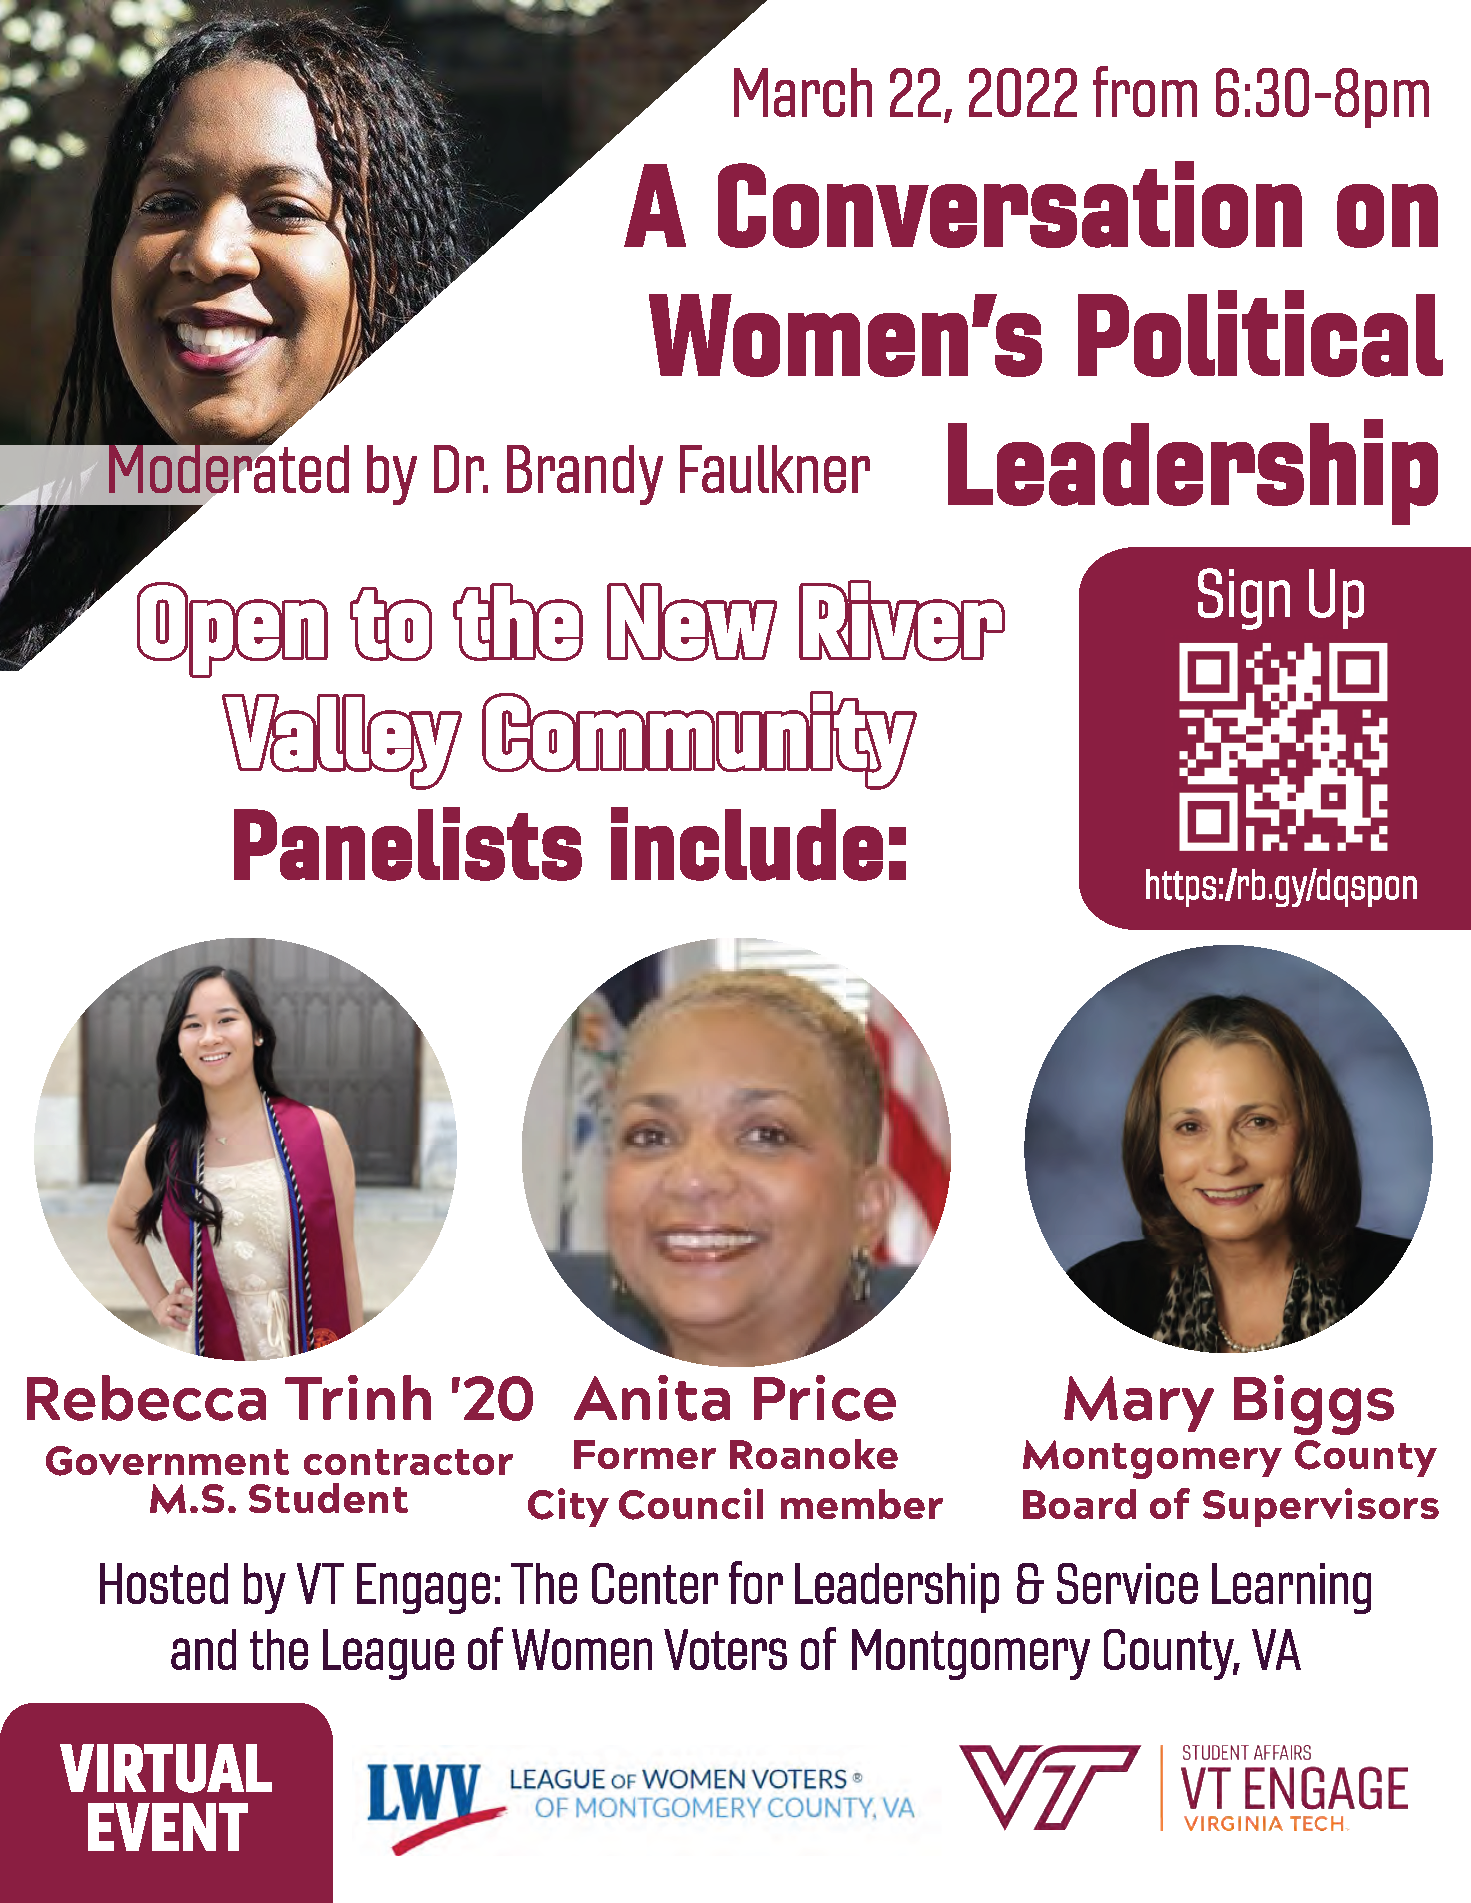 flyer with information about the March 22 program on women in political leadership